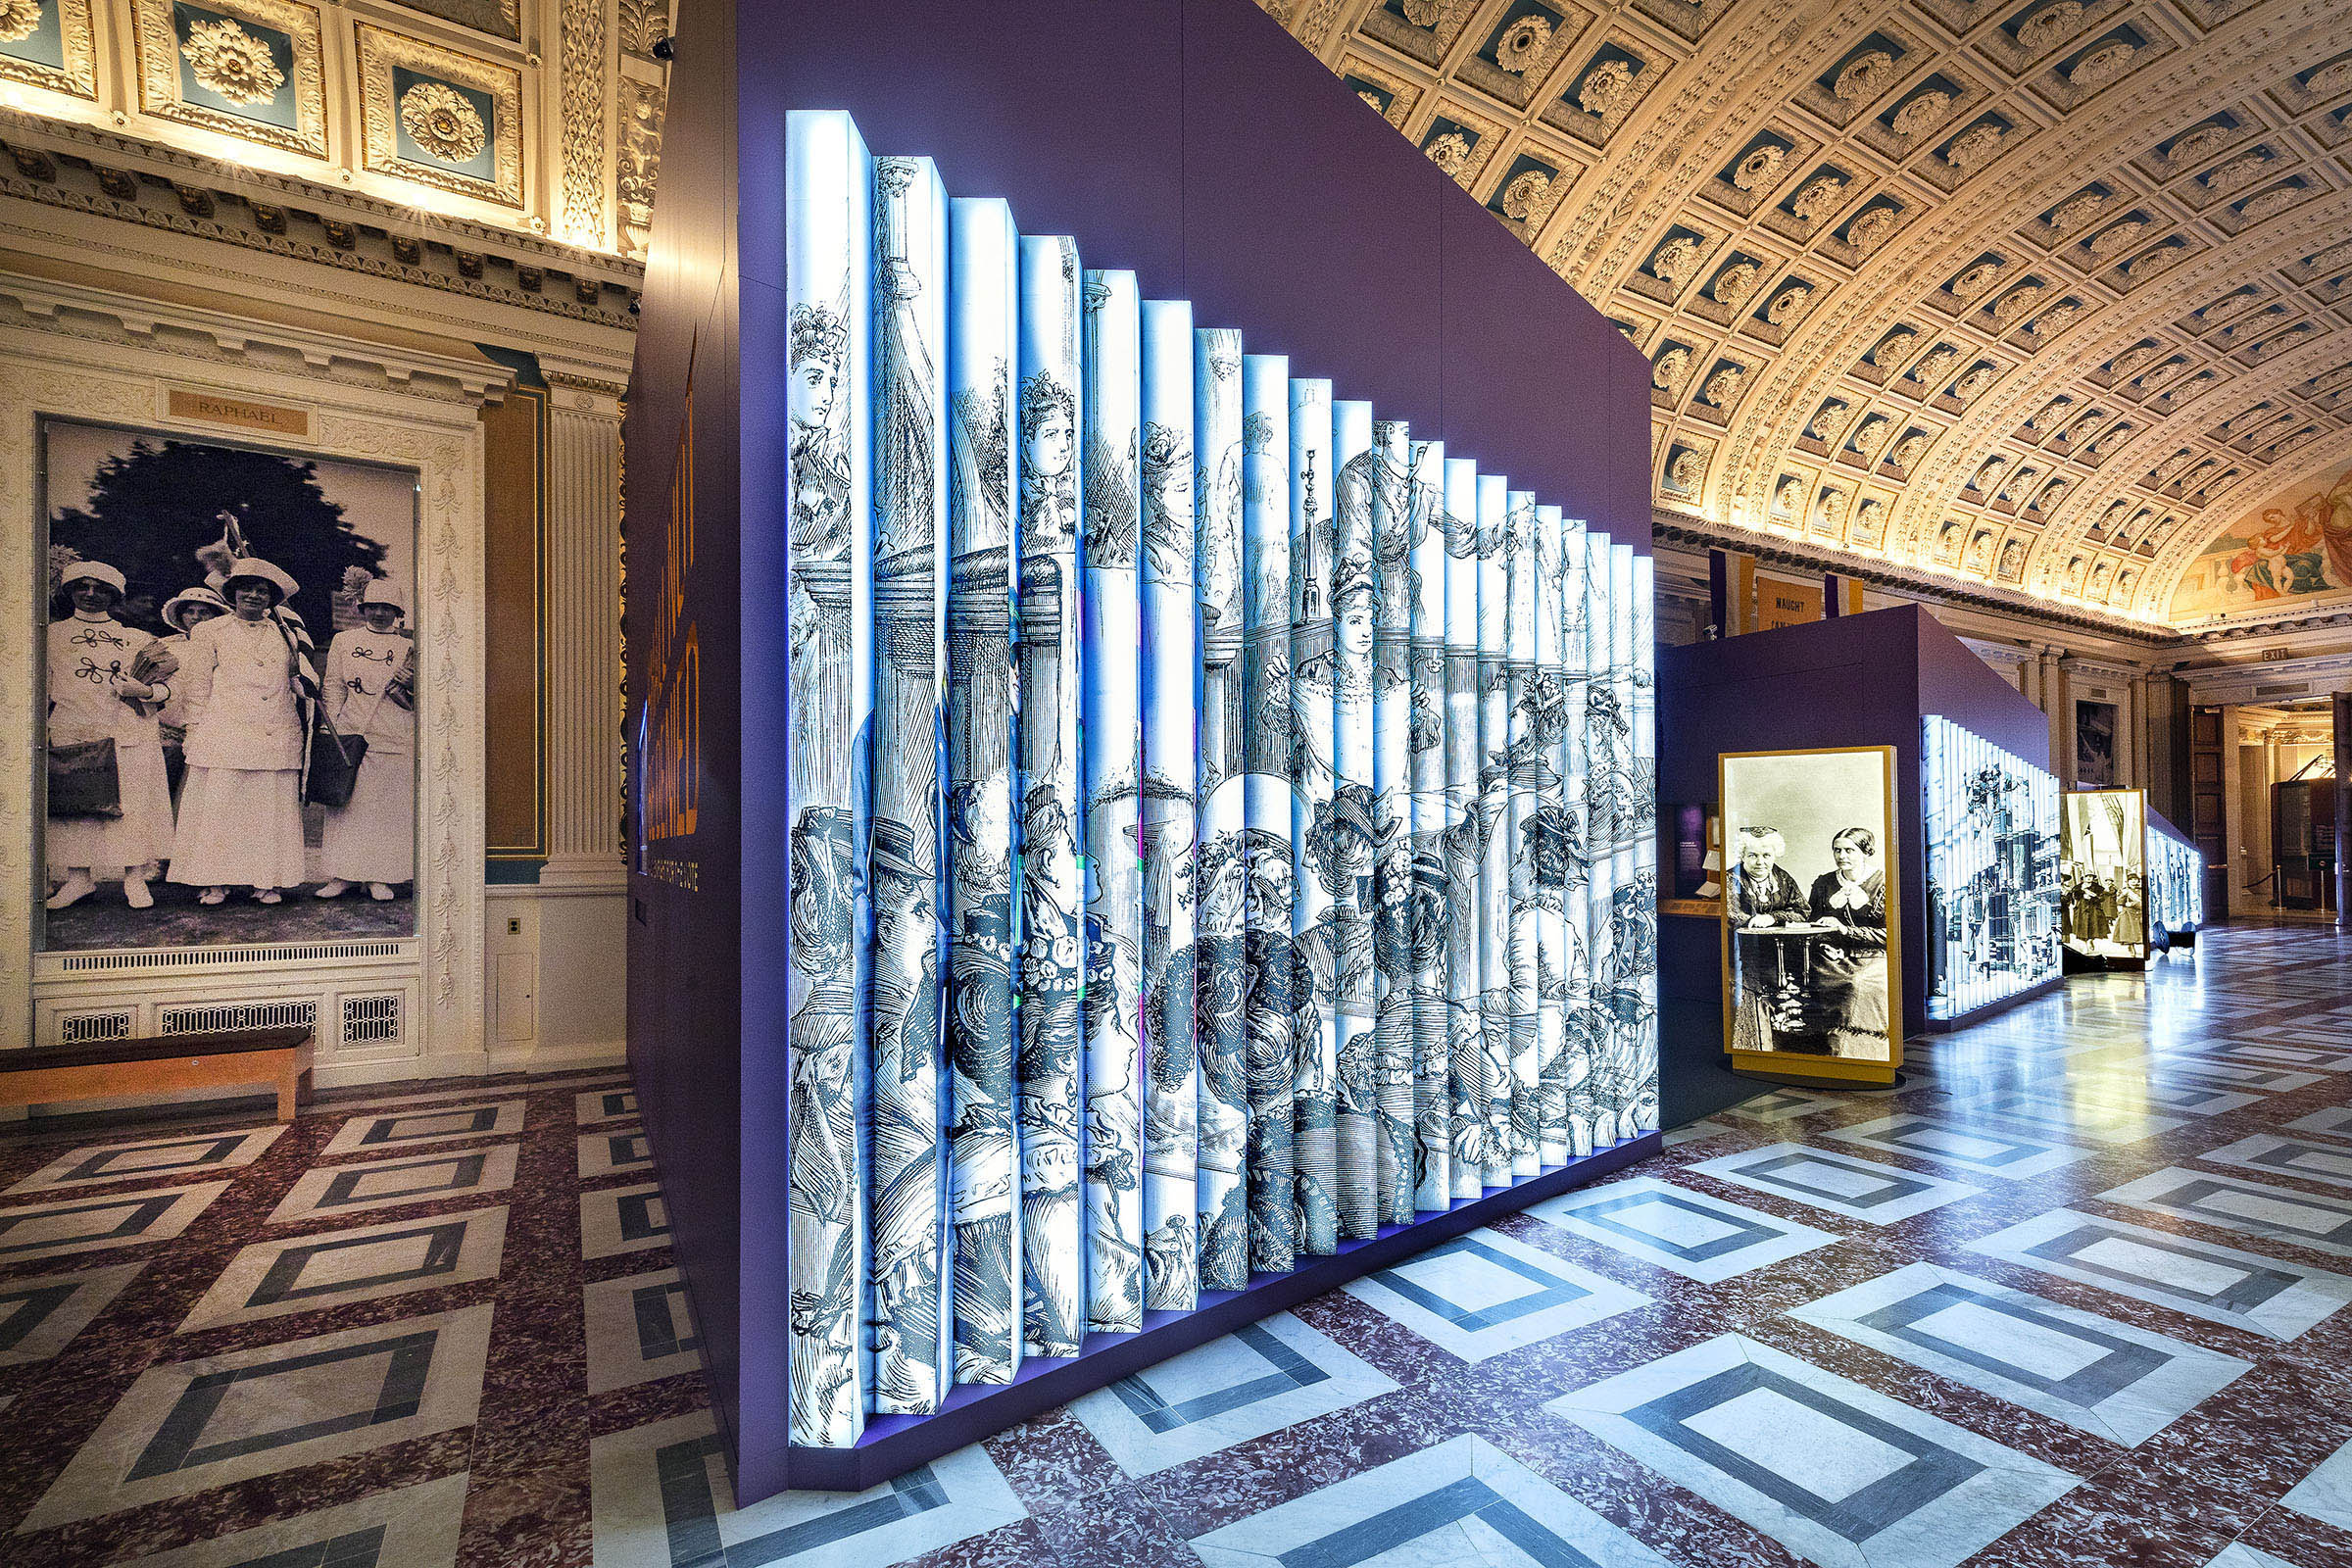 Shall Not Be Denied Exhibition. The “street” is comprised of large, backlit, lenticular images of suffragists protesting—first in private spaces, and then in public—across the 160+ years of the struggle for the vote and the fight for women’s rights.